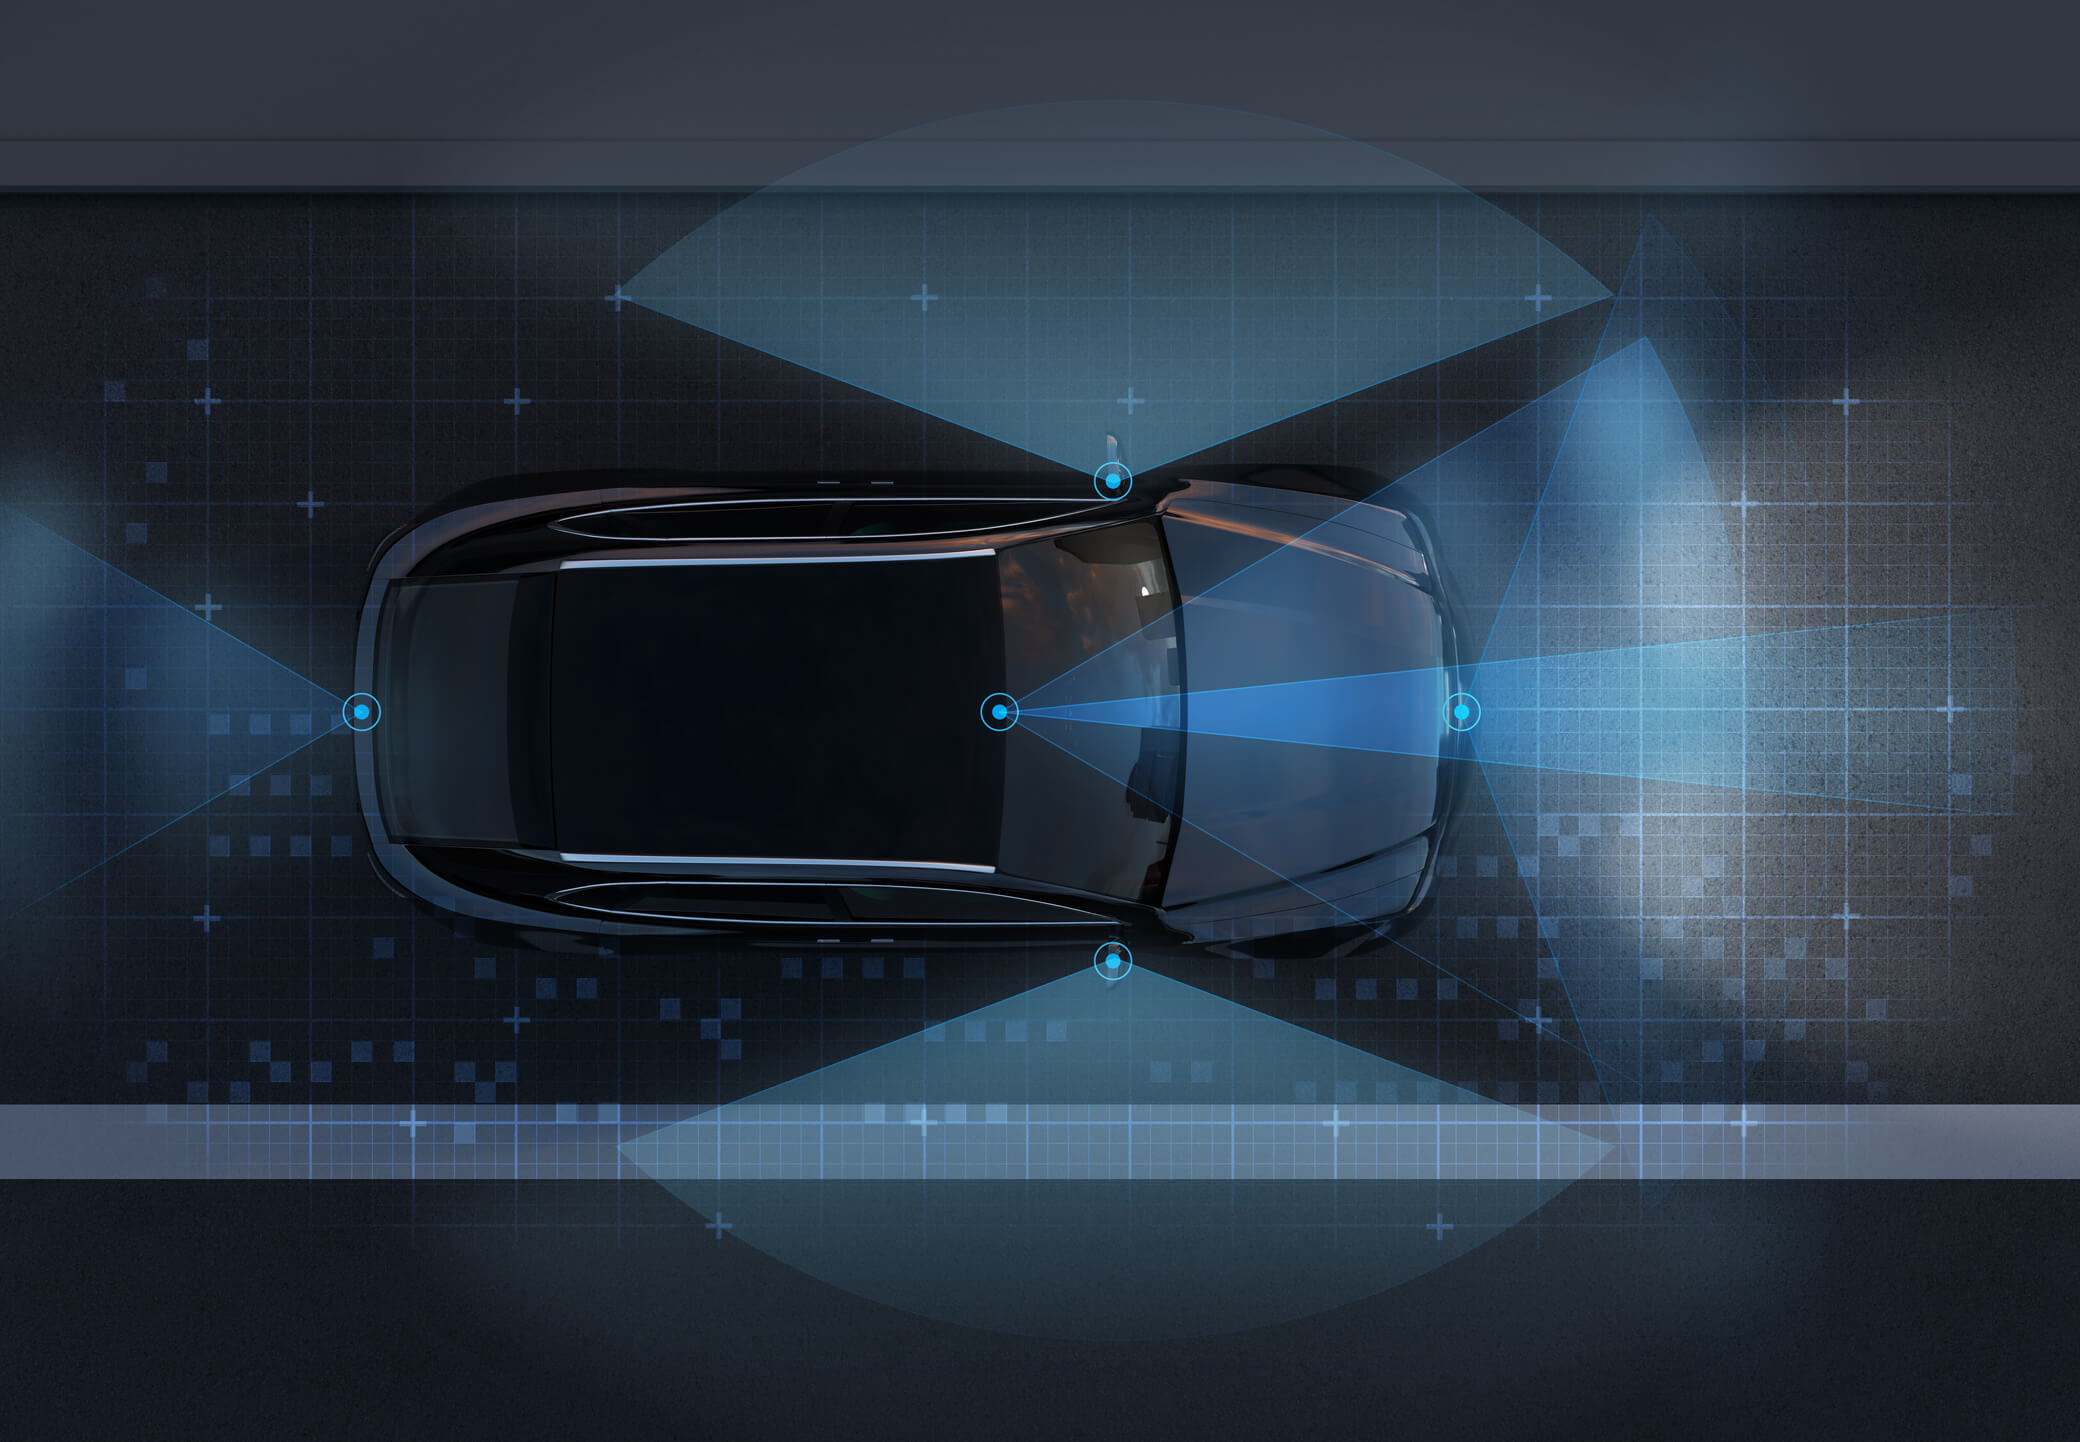 Top view of self-driving SUV on the road with sensing graphic pattern retouched.